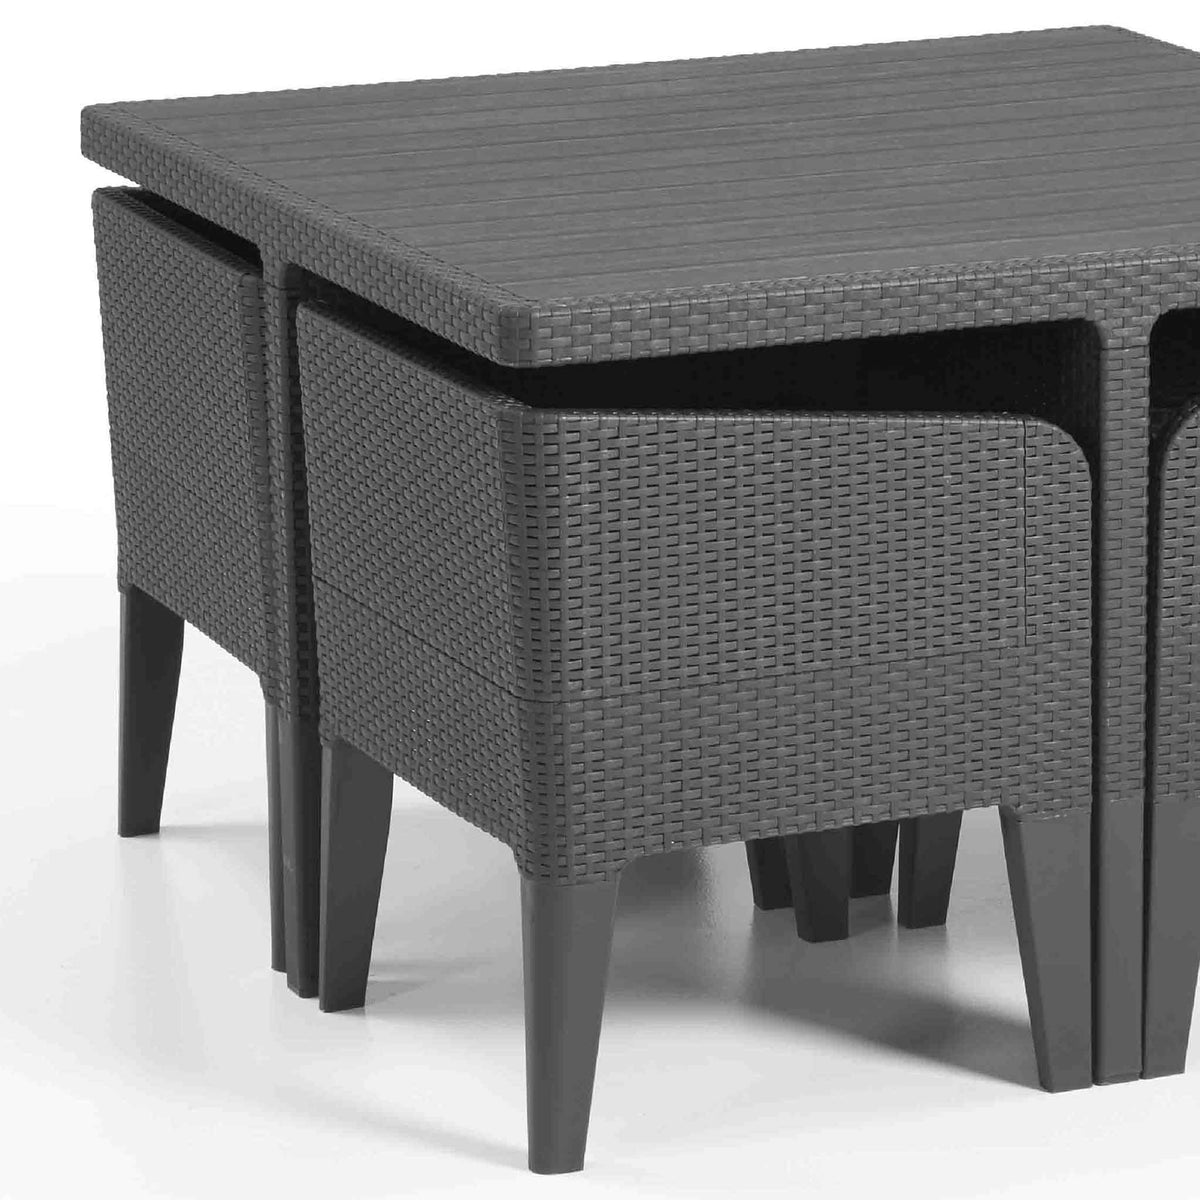 Keter Dine Out 4 Seater Dining Set - Close up of chair nested under table